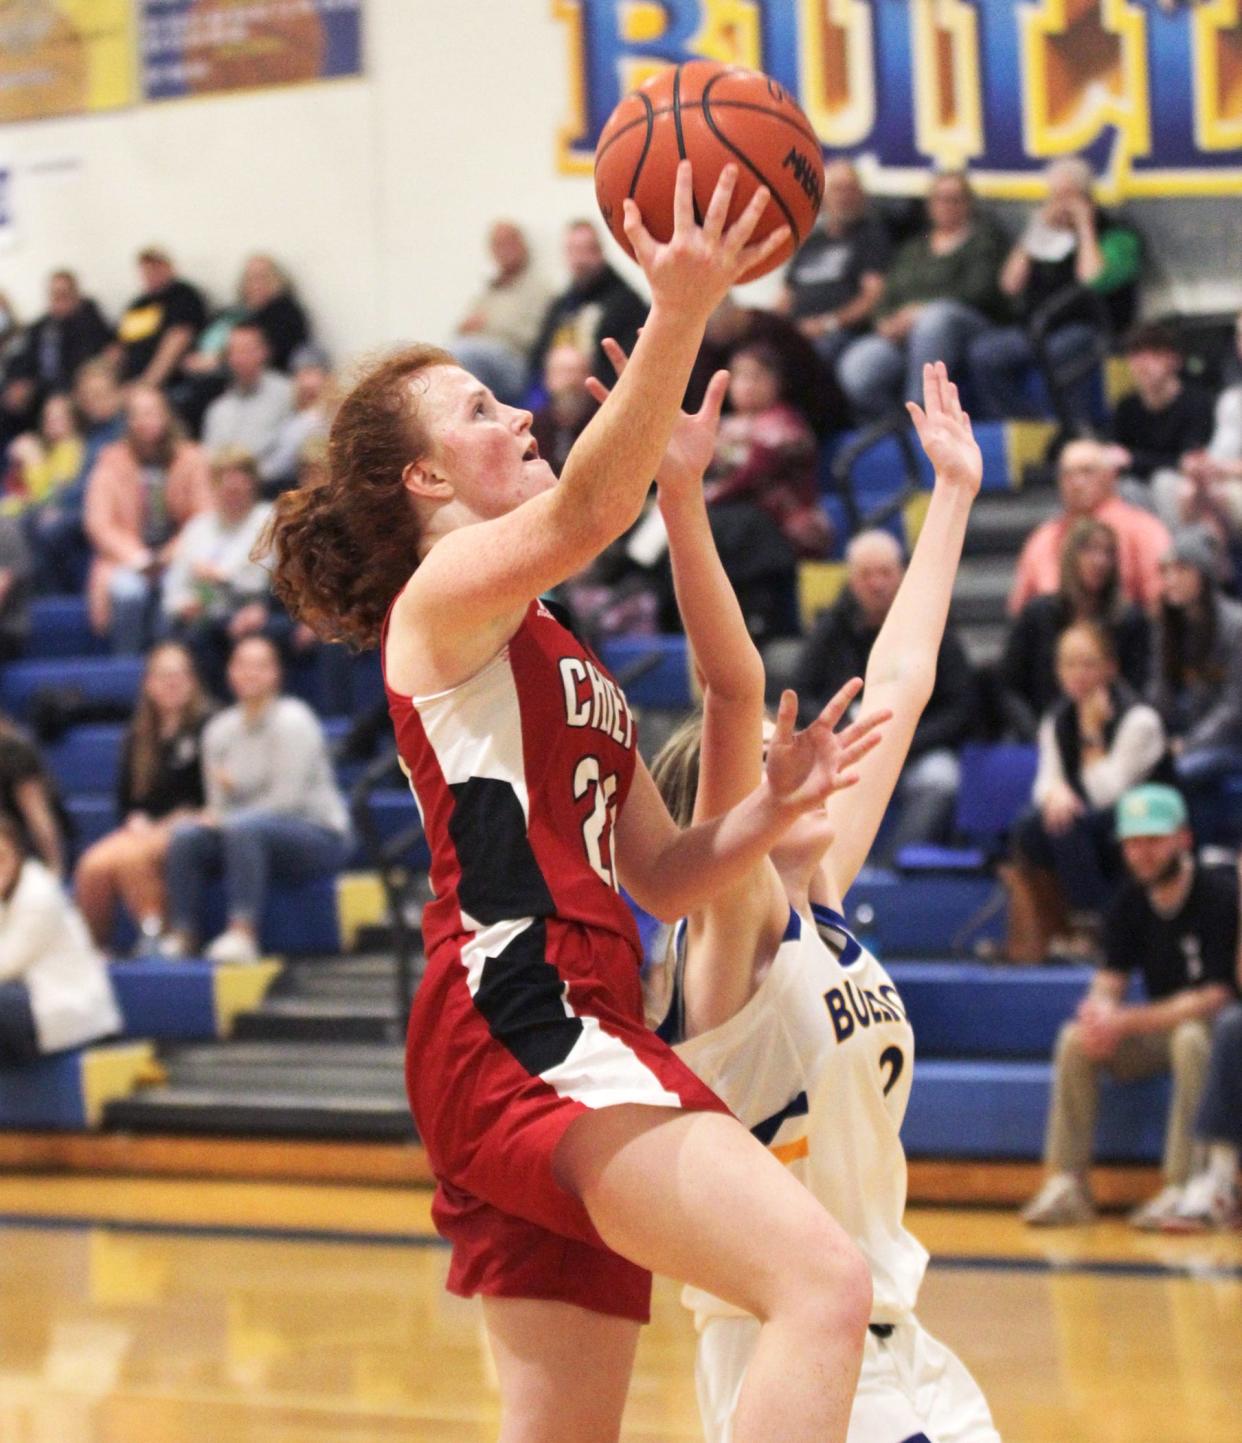 Bailee Freedline led White Pigeon with 17 points in a win on Tuesday.